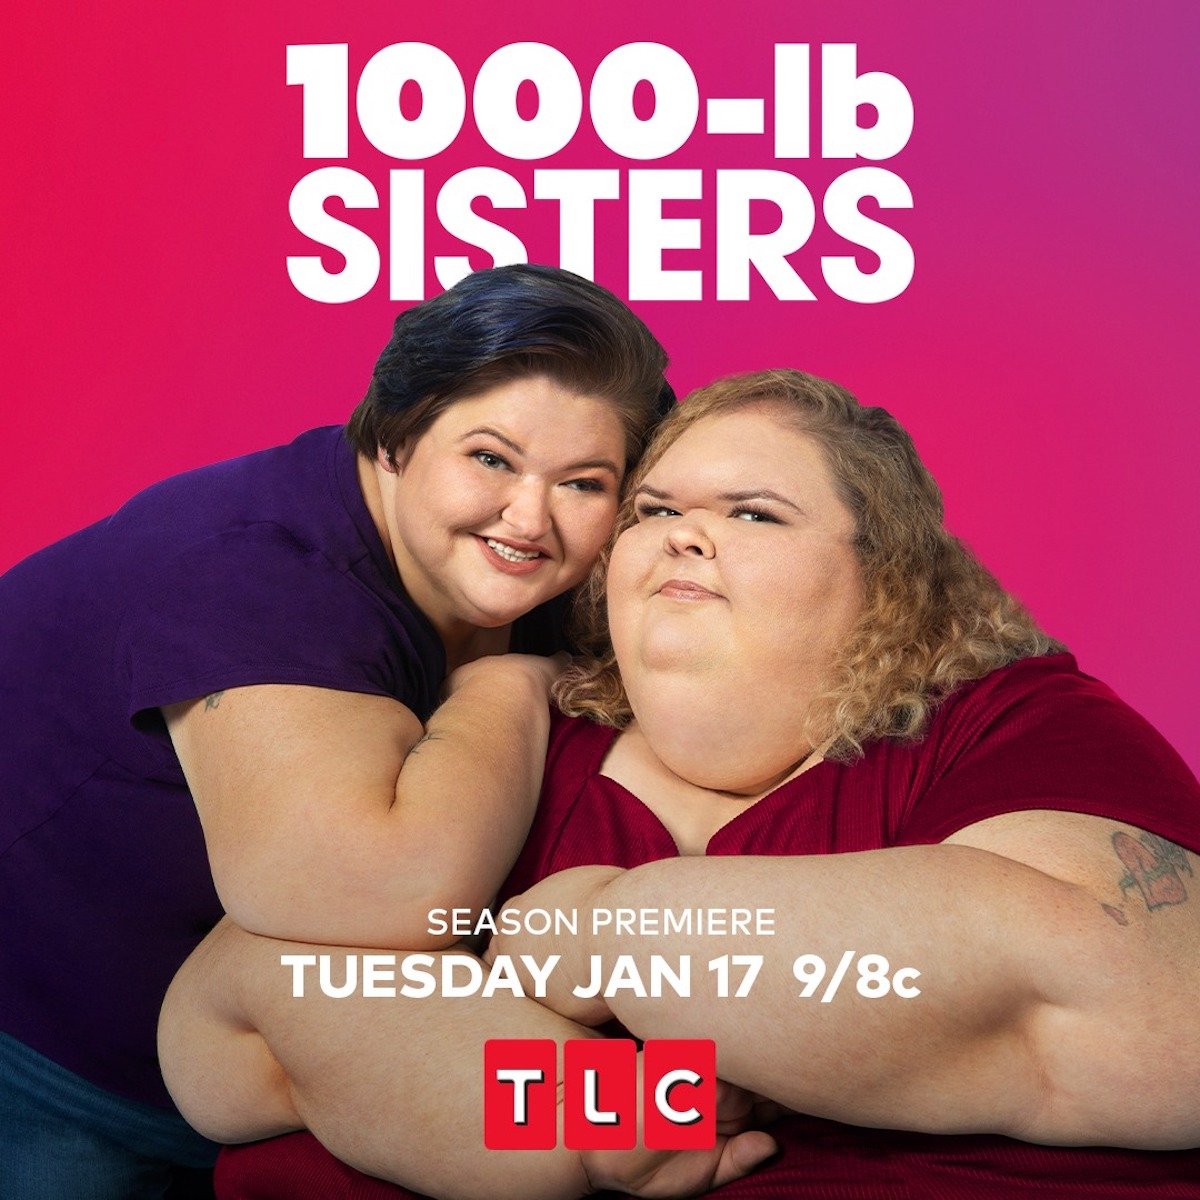 What Time Does '1000-lb Sisters' Come On? Season 4 Watch Guide